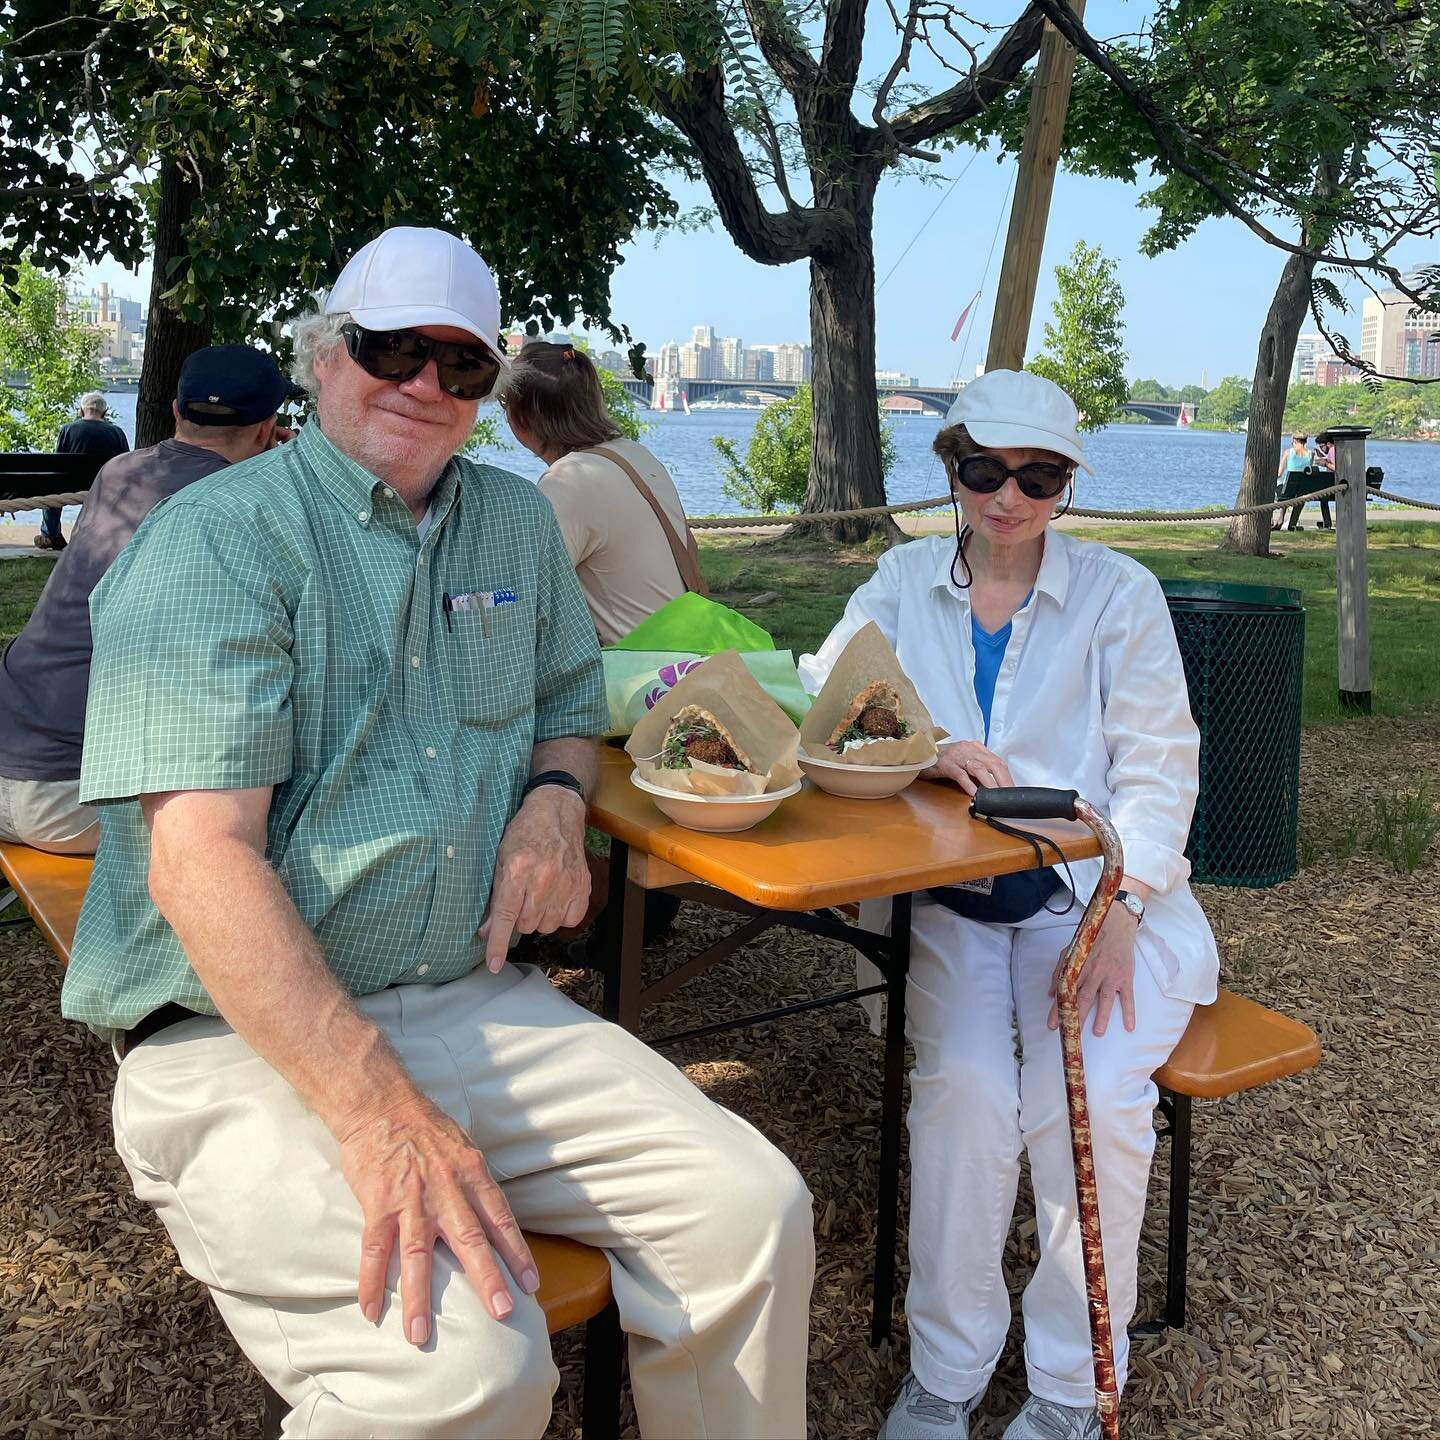 Two of our biggest fans today at the Esplanade ! They make sure to come and visit us every week for a Fantastic Falafel pita sandwich !